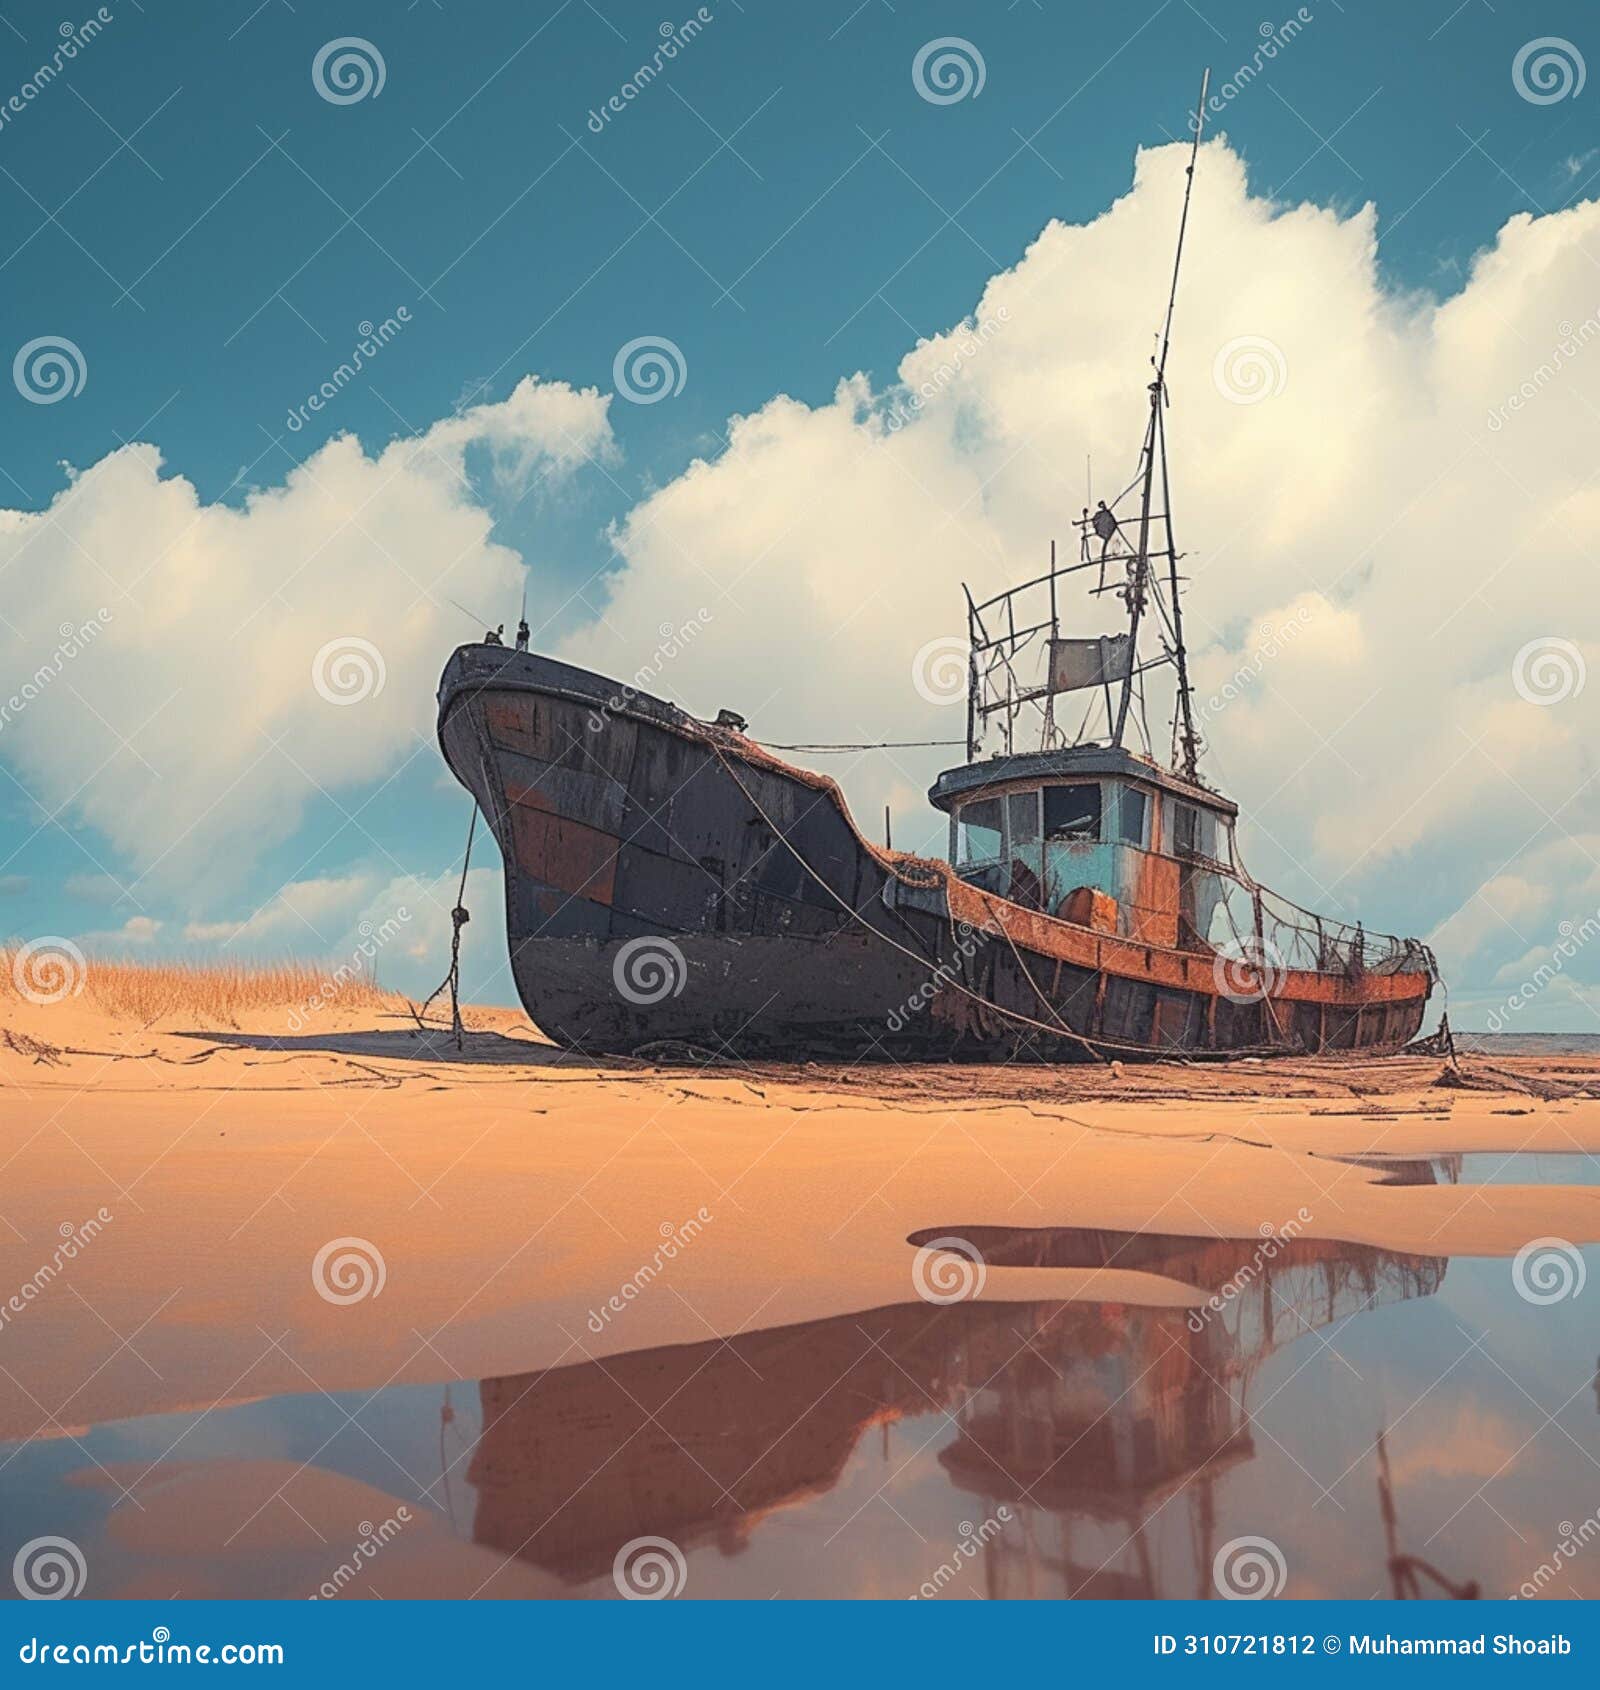 rustic fishing boat stranded on sandy shore, a relic of seafaring days